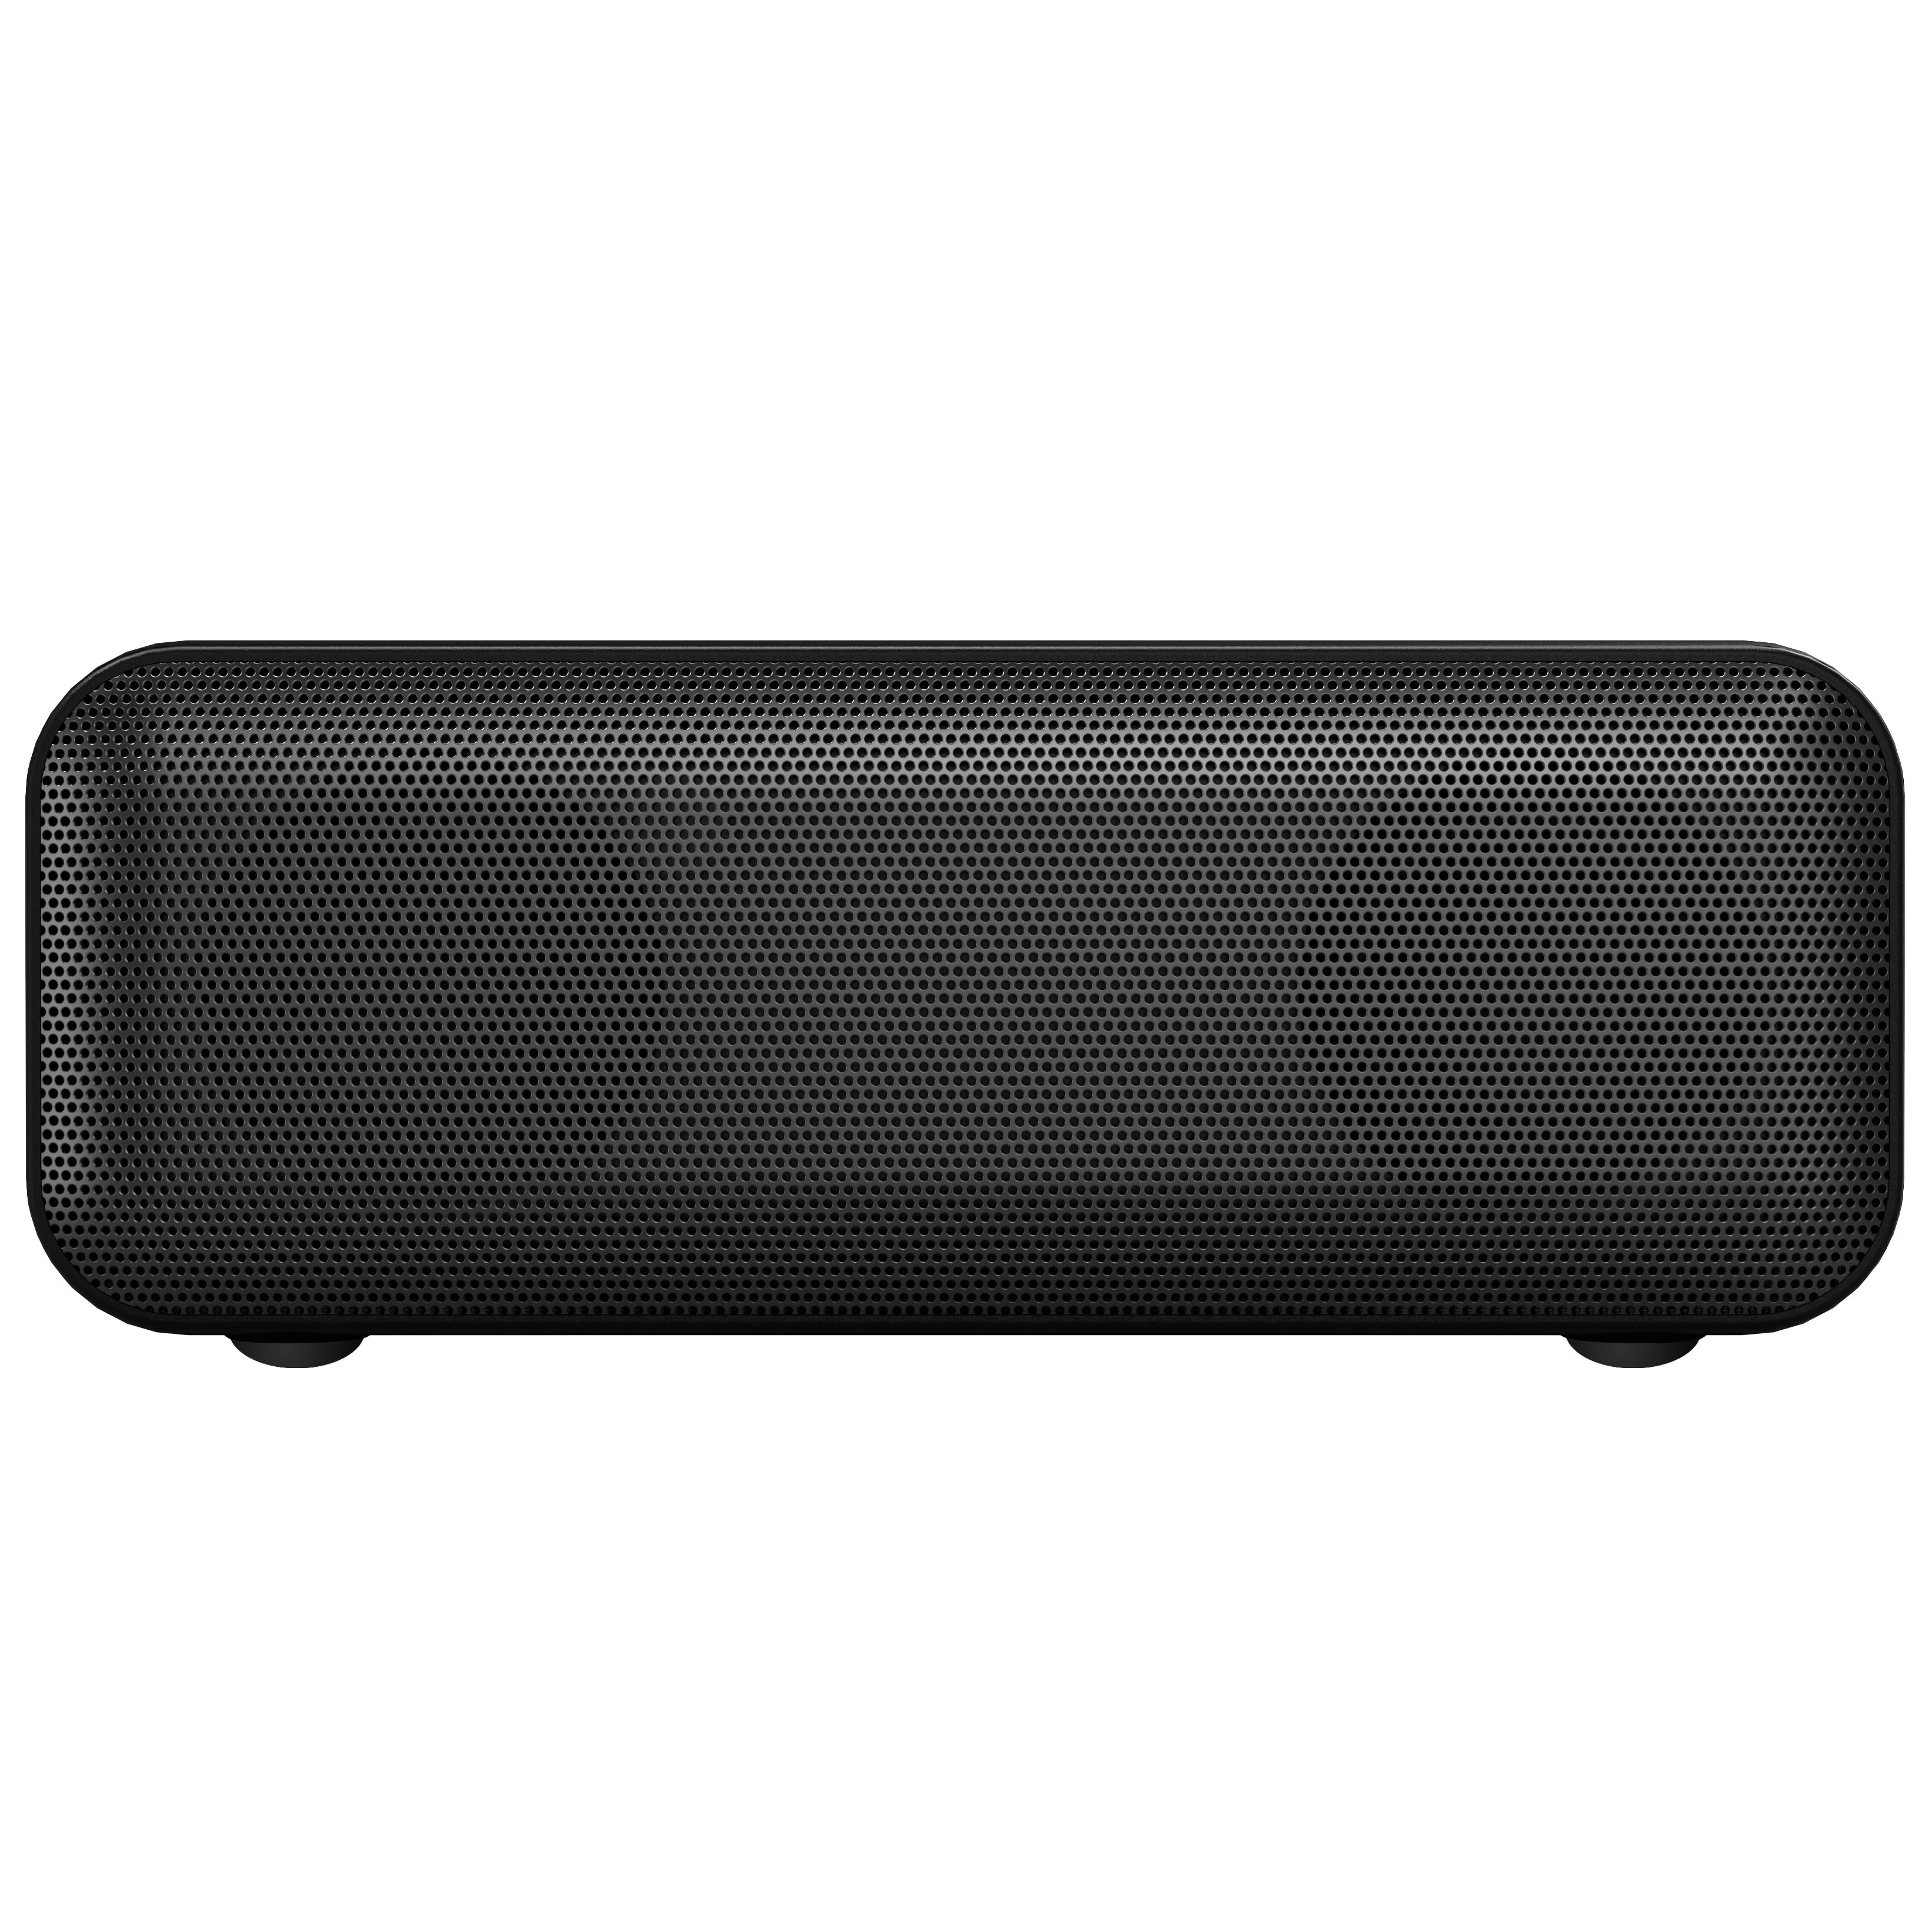 Long Standby Time 24 Hours playing time IPX7 Waterproof Wireless Portable BT Speaker